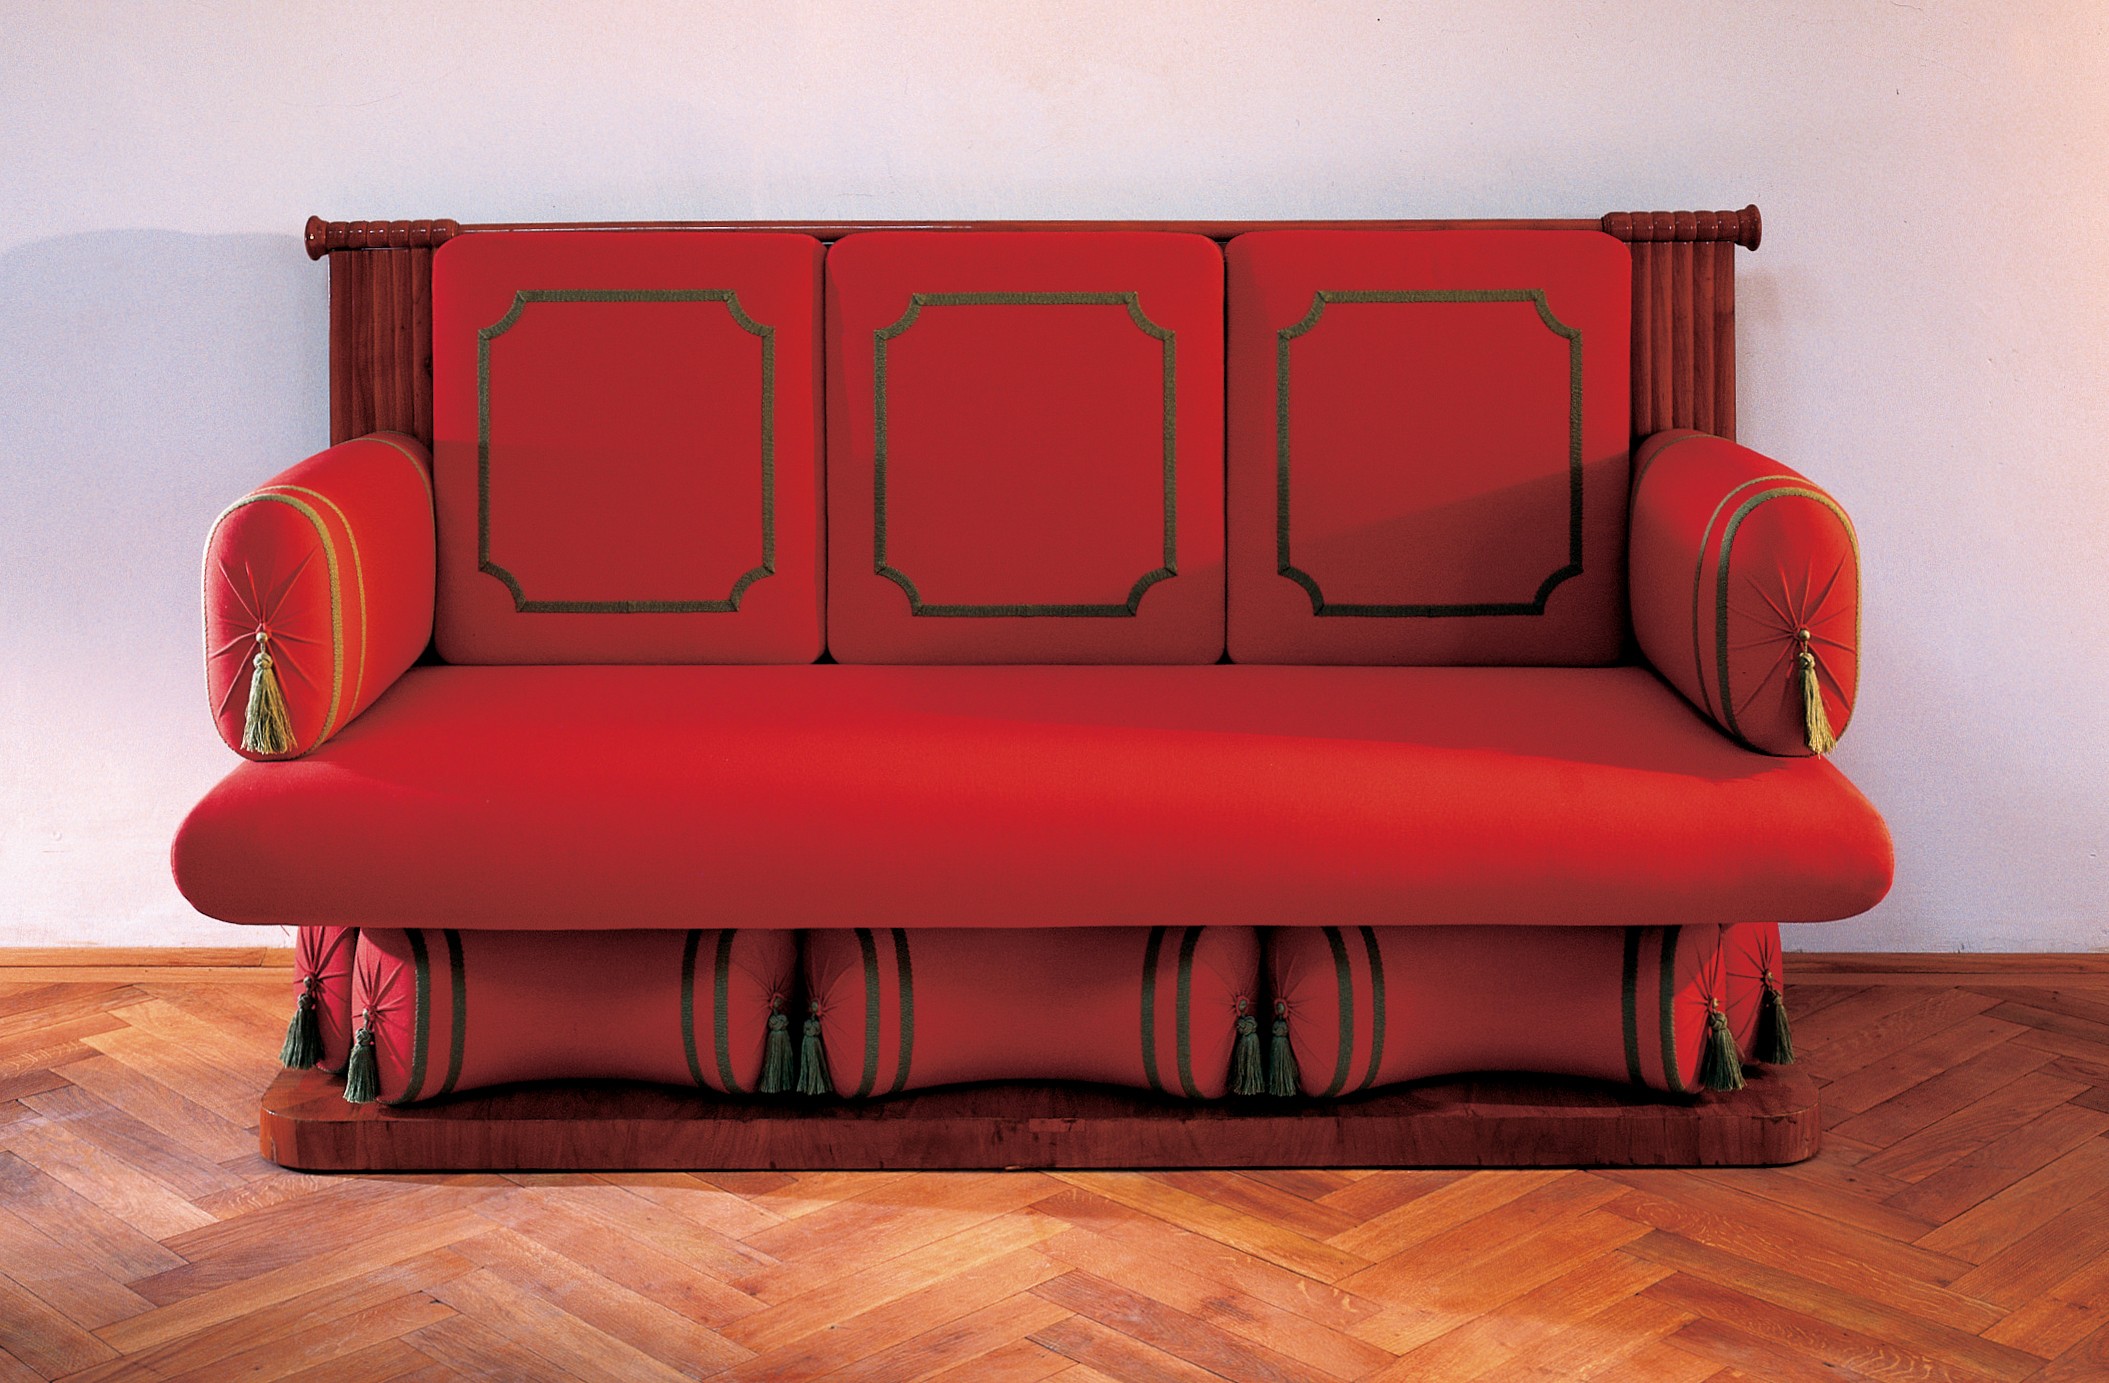 <BODY><div><span style="letter-spacing: 0px;">Sofa, Model No. 57, Vienna, ca. 1825/30, Design and manufacture: Danhauser Furniture Factory H 2726 / 1983 © MAK </span></div><div> </div></BODY>